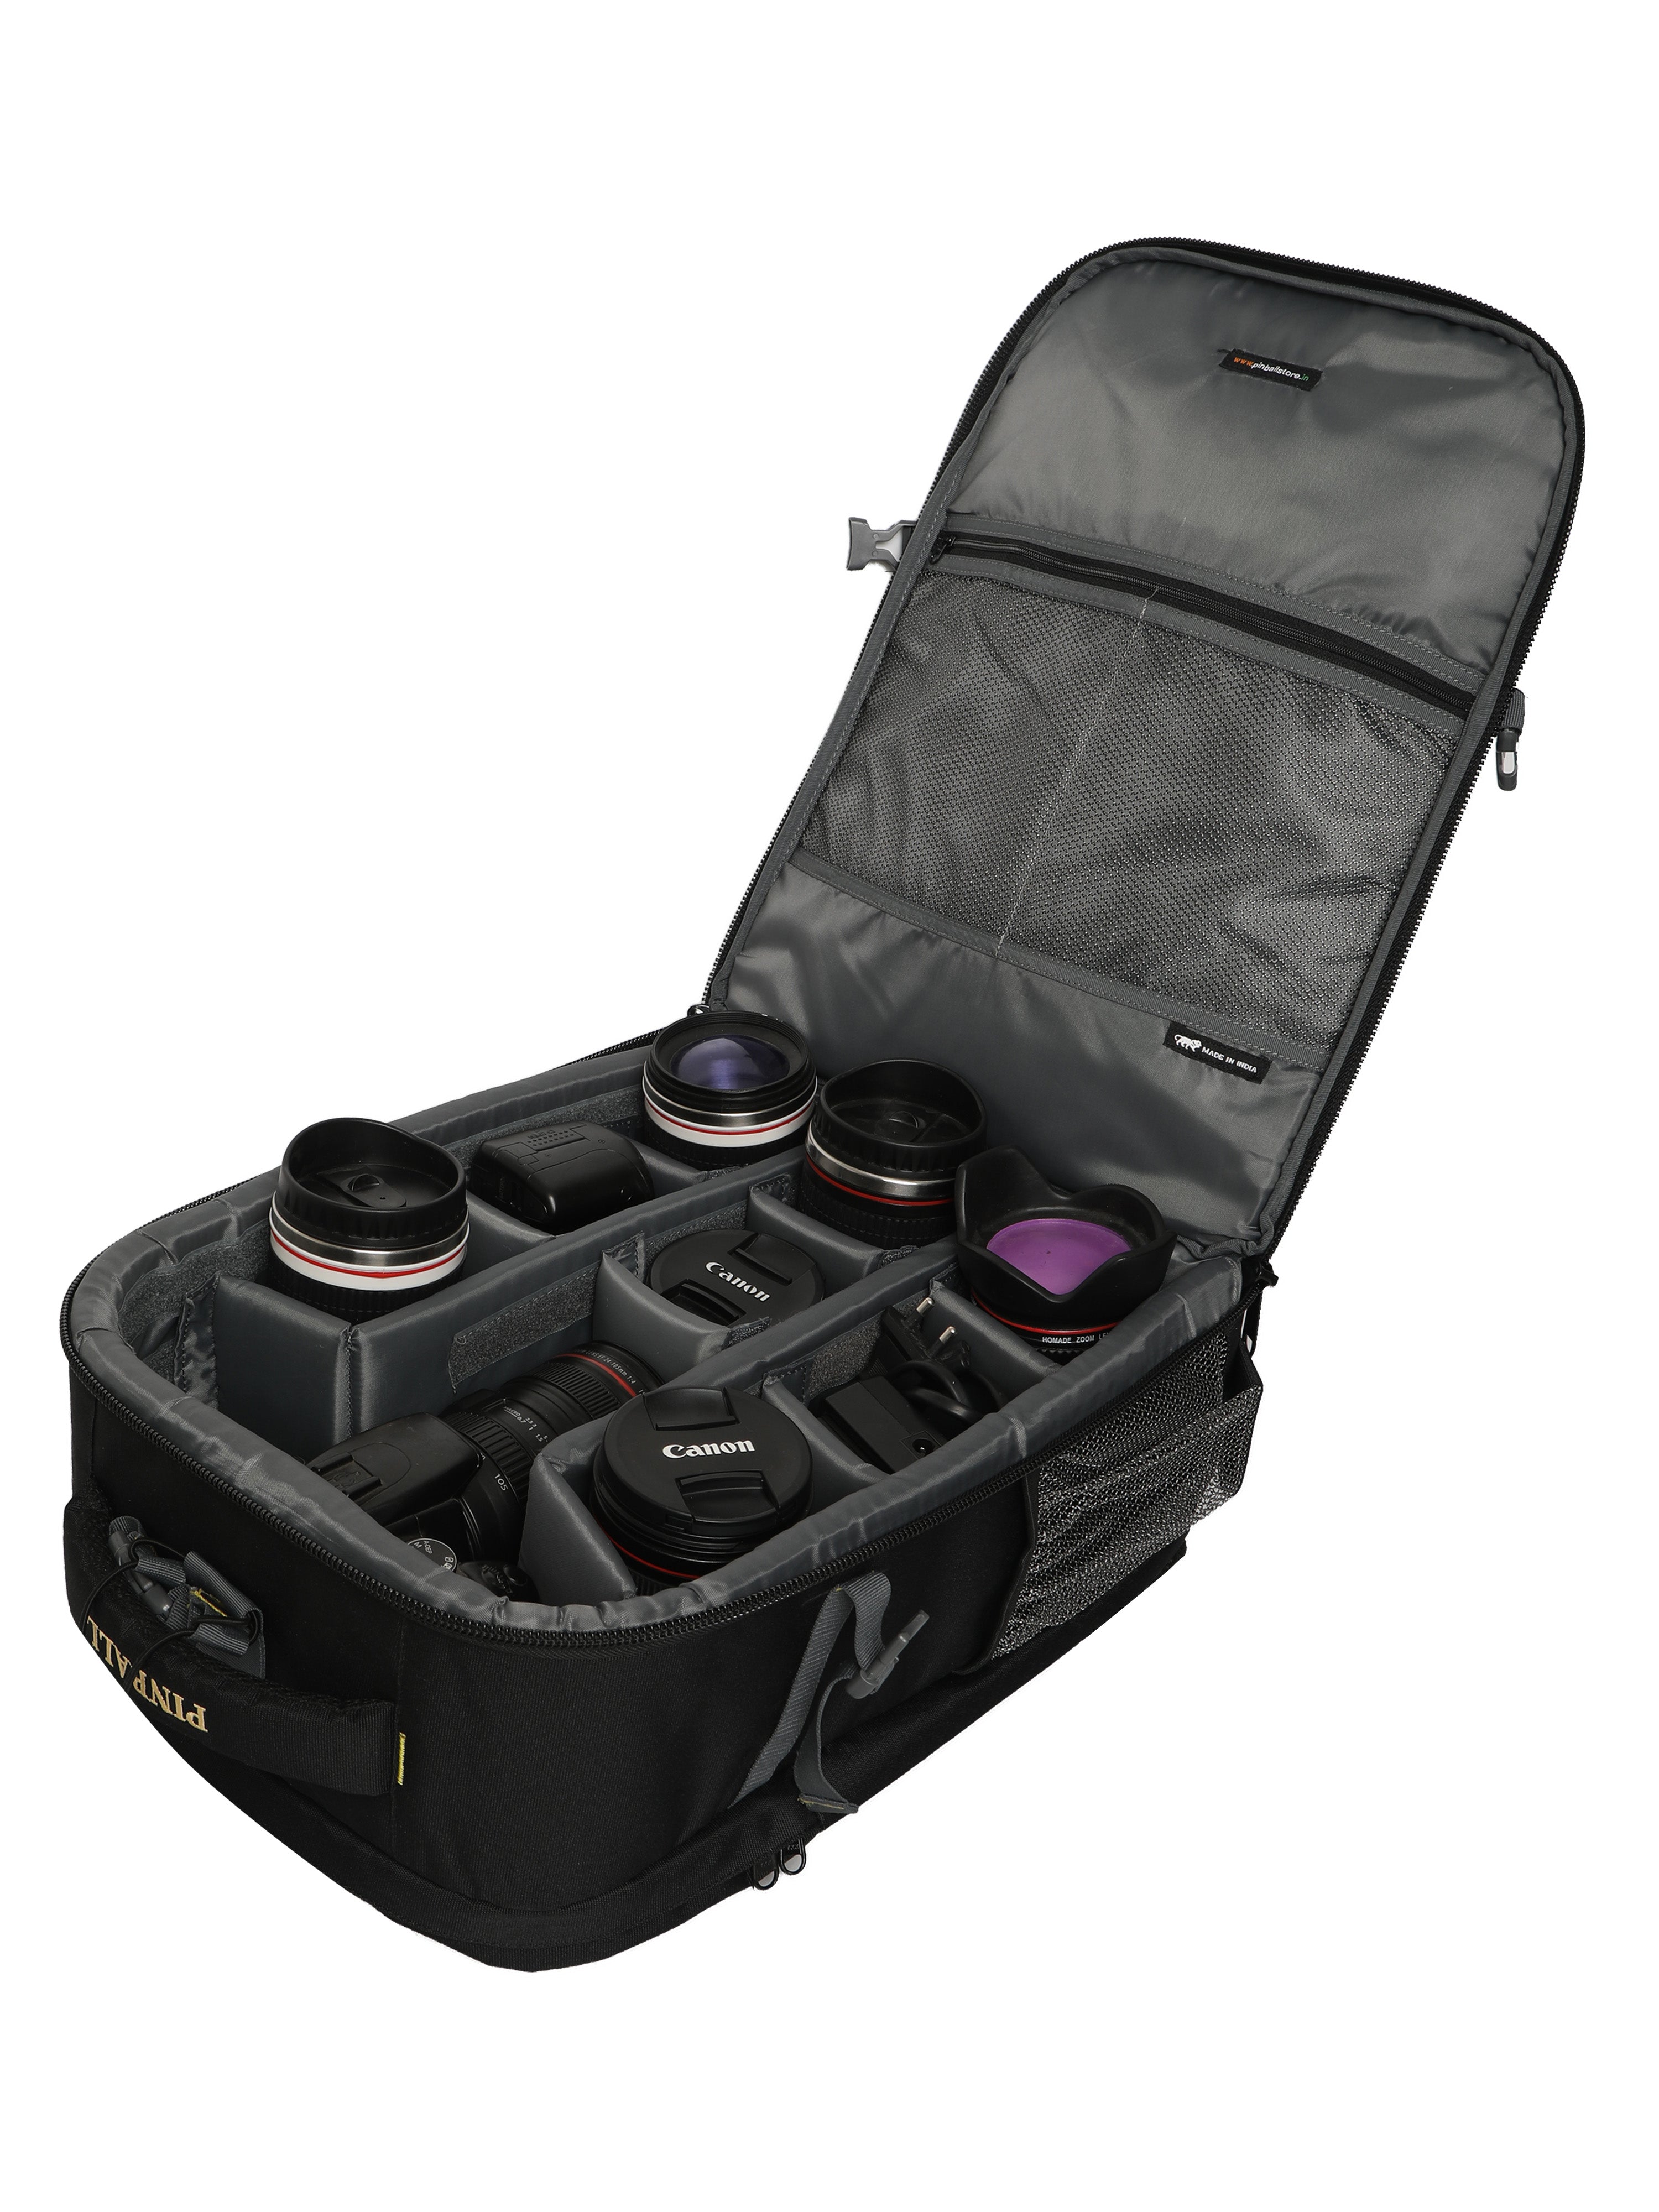 Nikon Camera Bag in Bhopal at best price by Db Next - Justdial